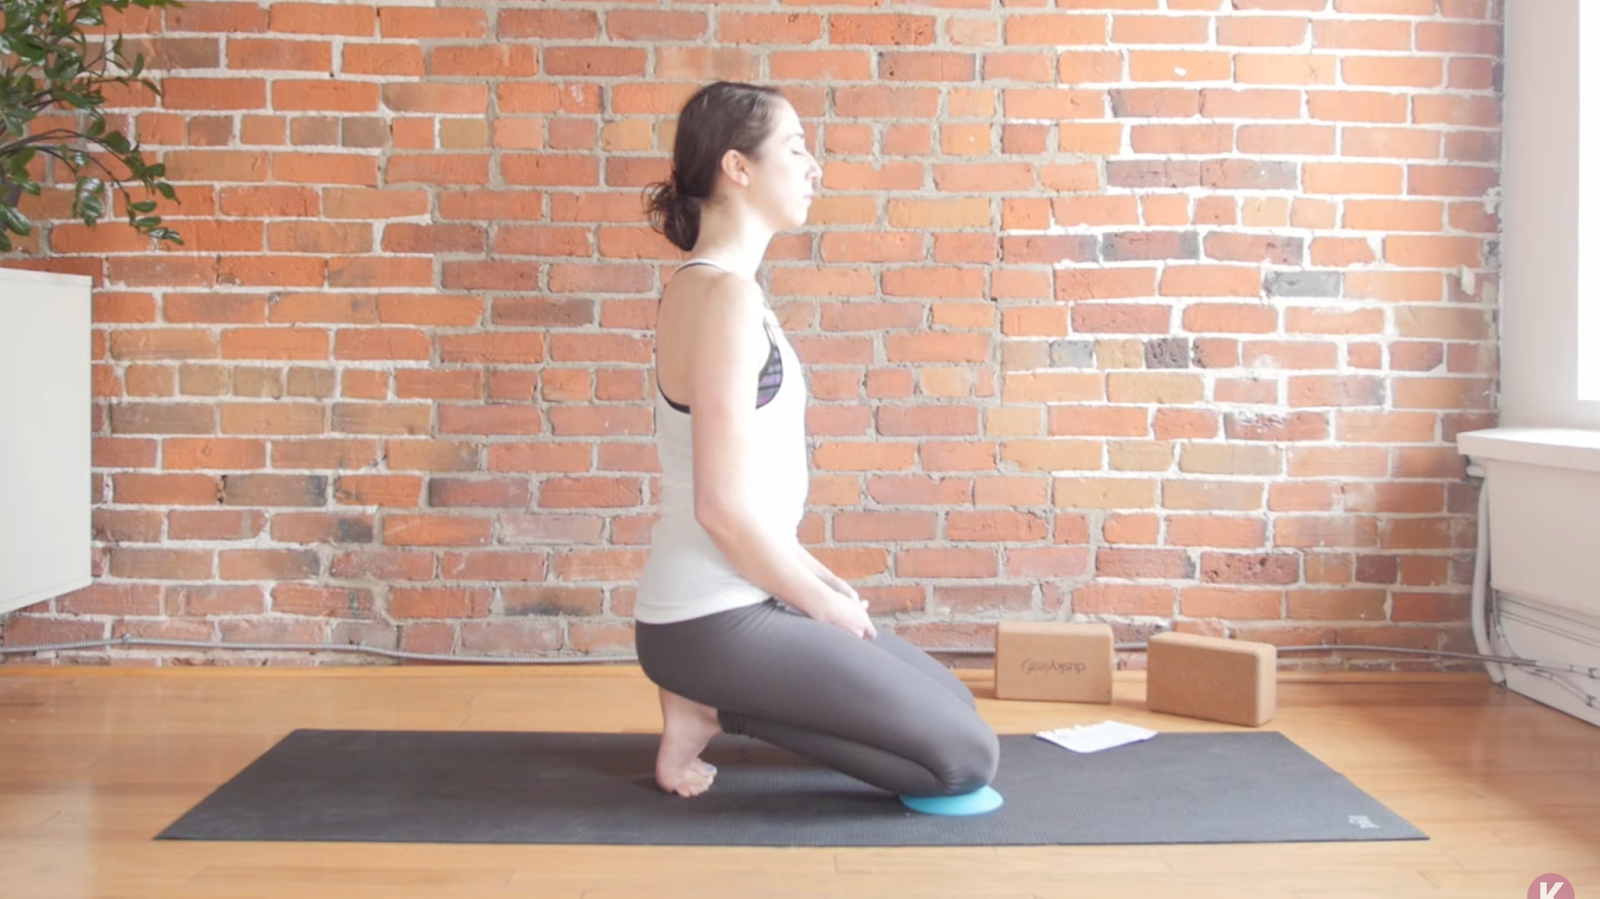 15 Siting Yoga Poses To Improve Flexibility, Mobility, And Posture